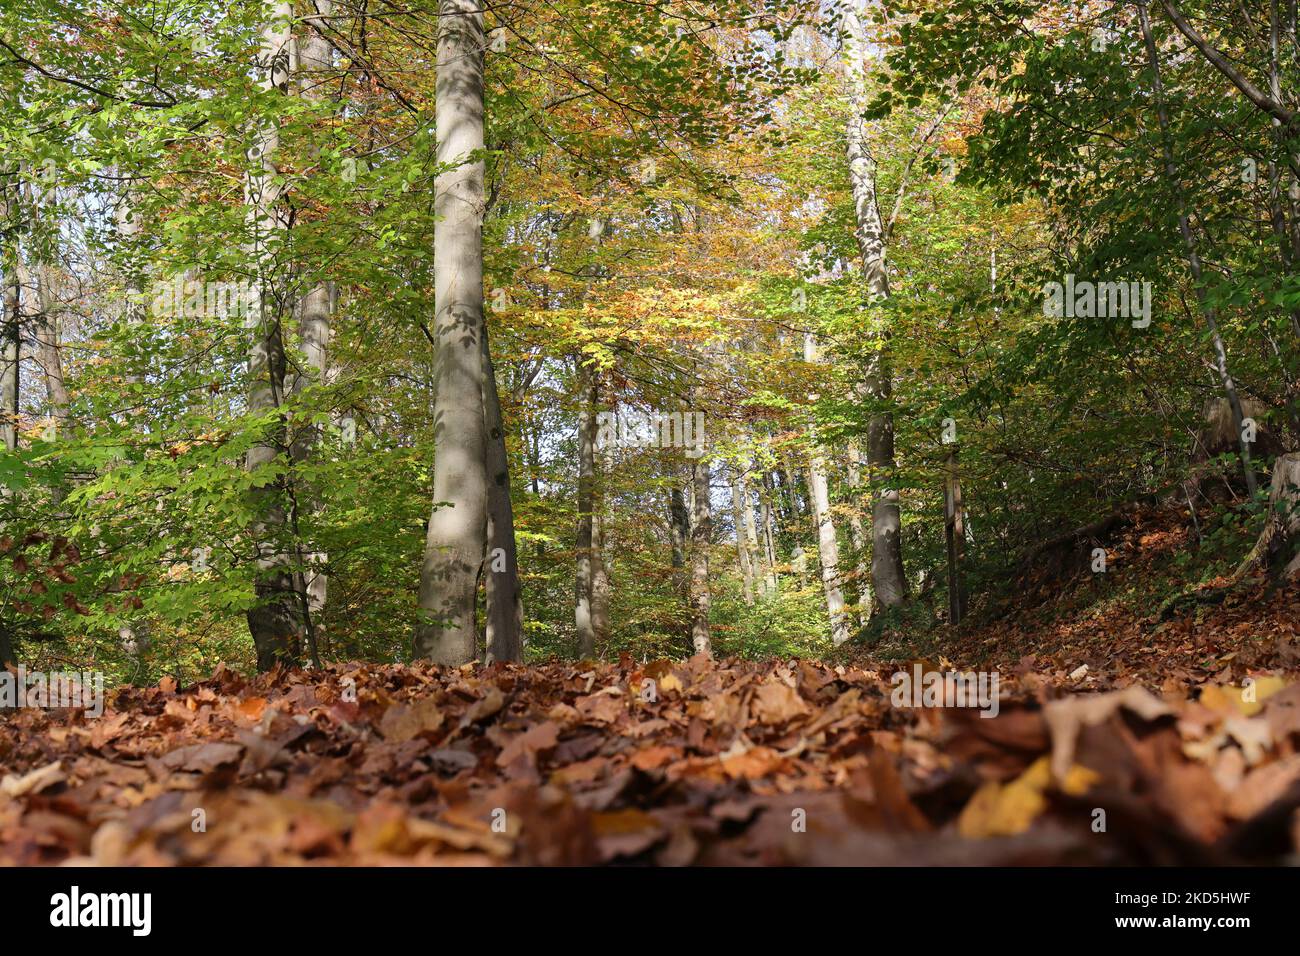 Golden-brown autumn leaves cover the ground in the sunlit forest Stock Photo